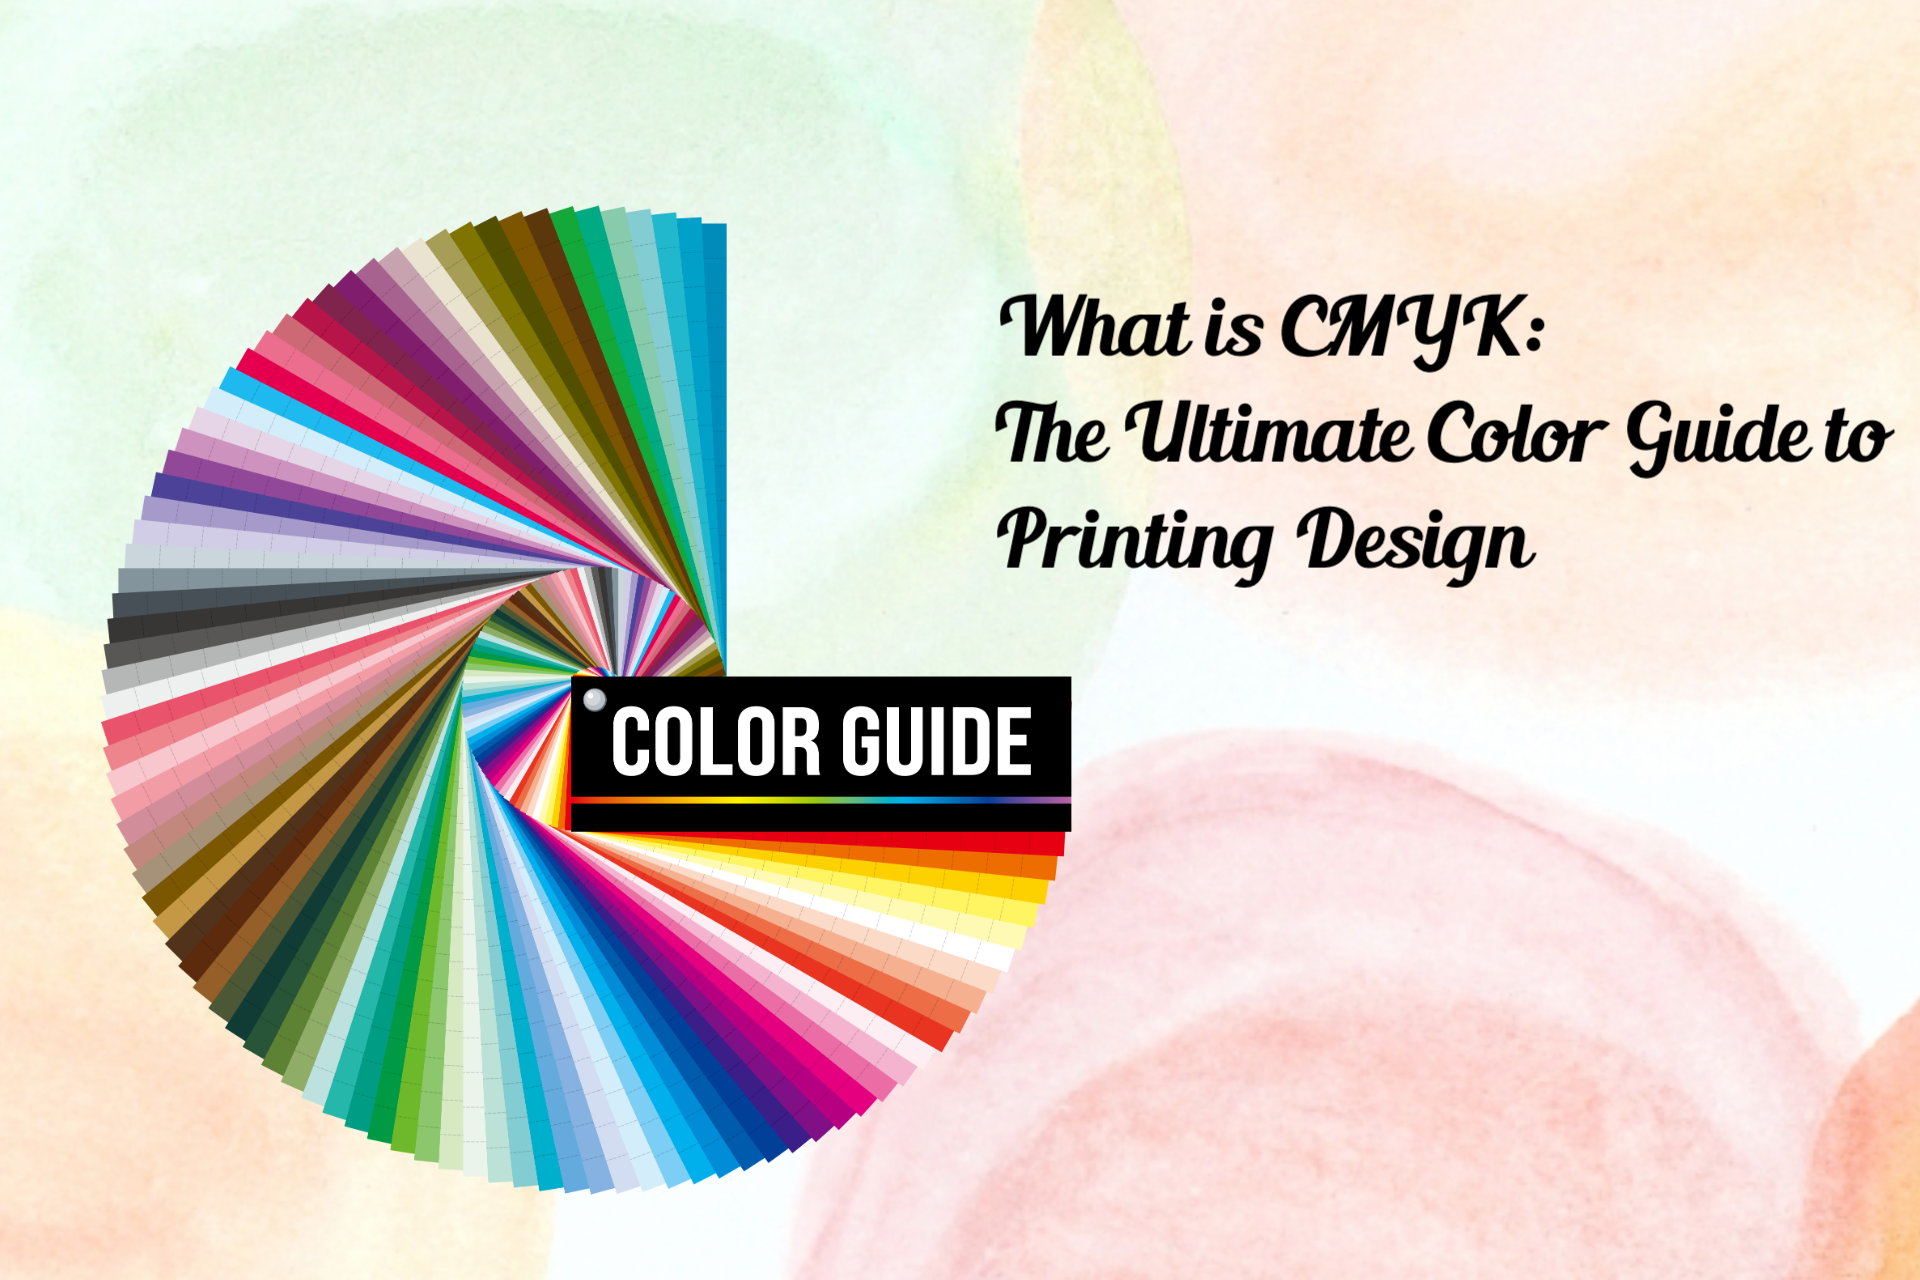 What is CMYK: The Ultimate Color Guide to Printing Design